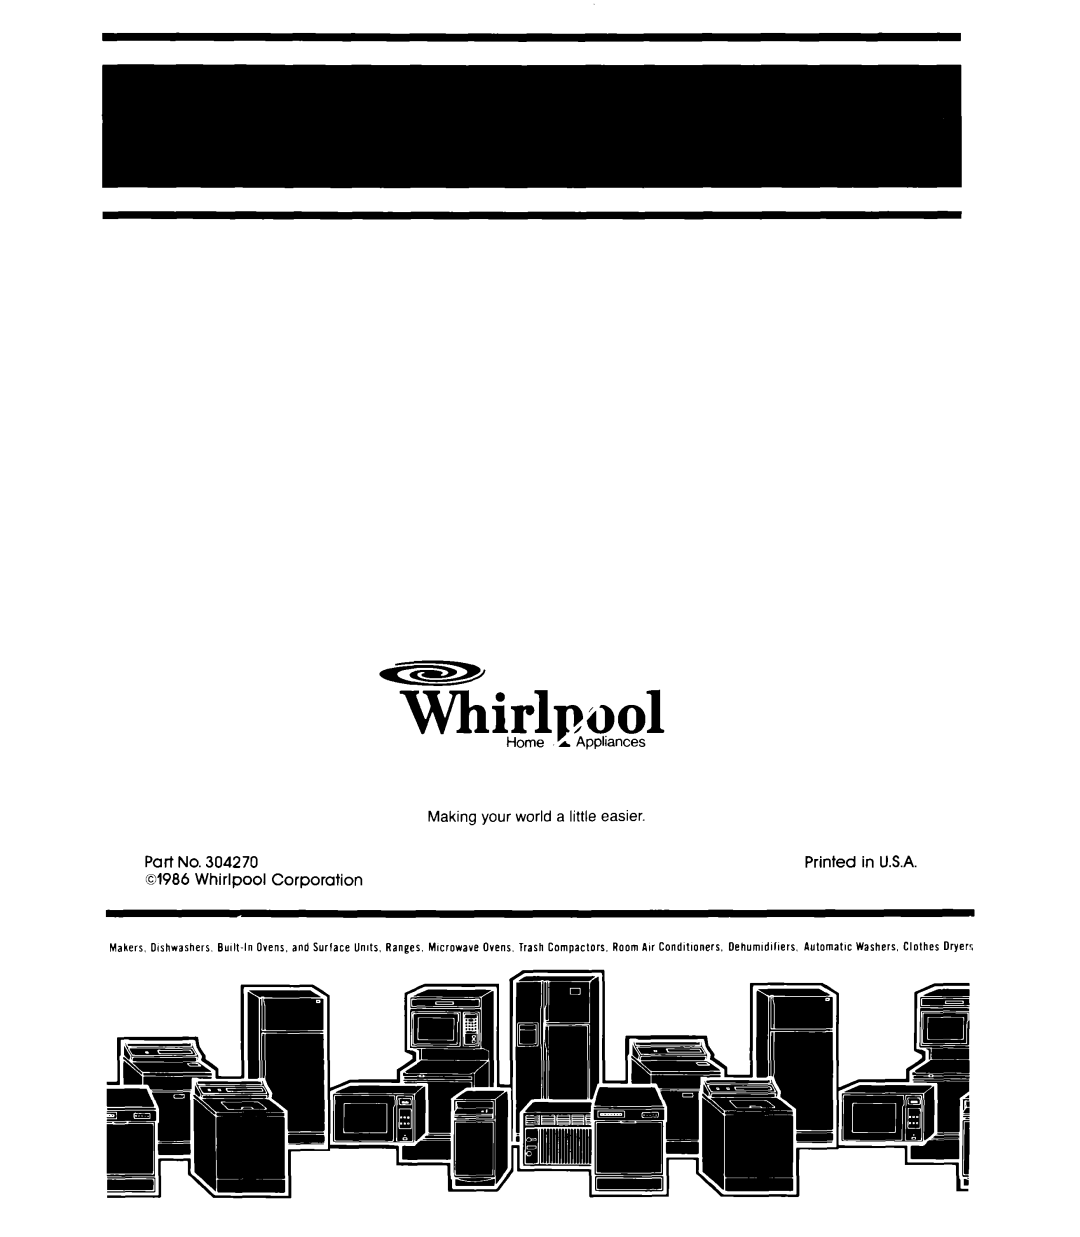 Whirlpool DU9700XR manual YLirlpool, Making your world a little, Printed, in U.S.A, Corporation, Washers, Clothes Dryer? 